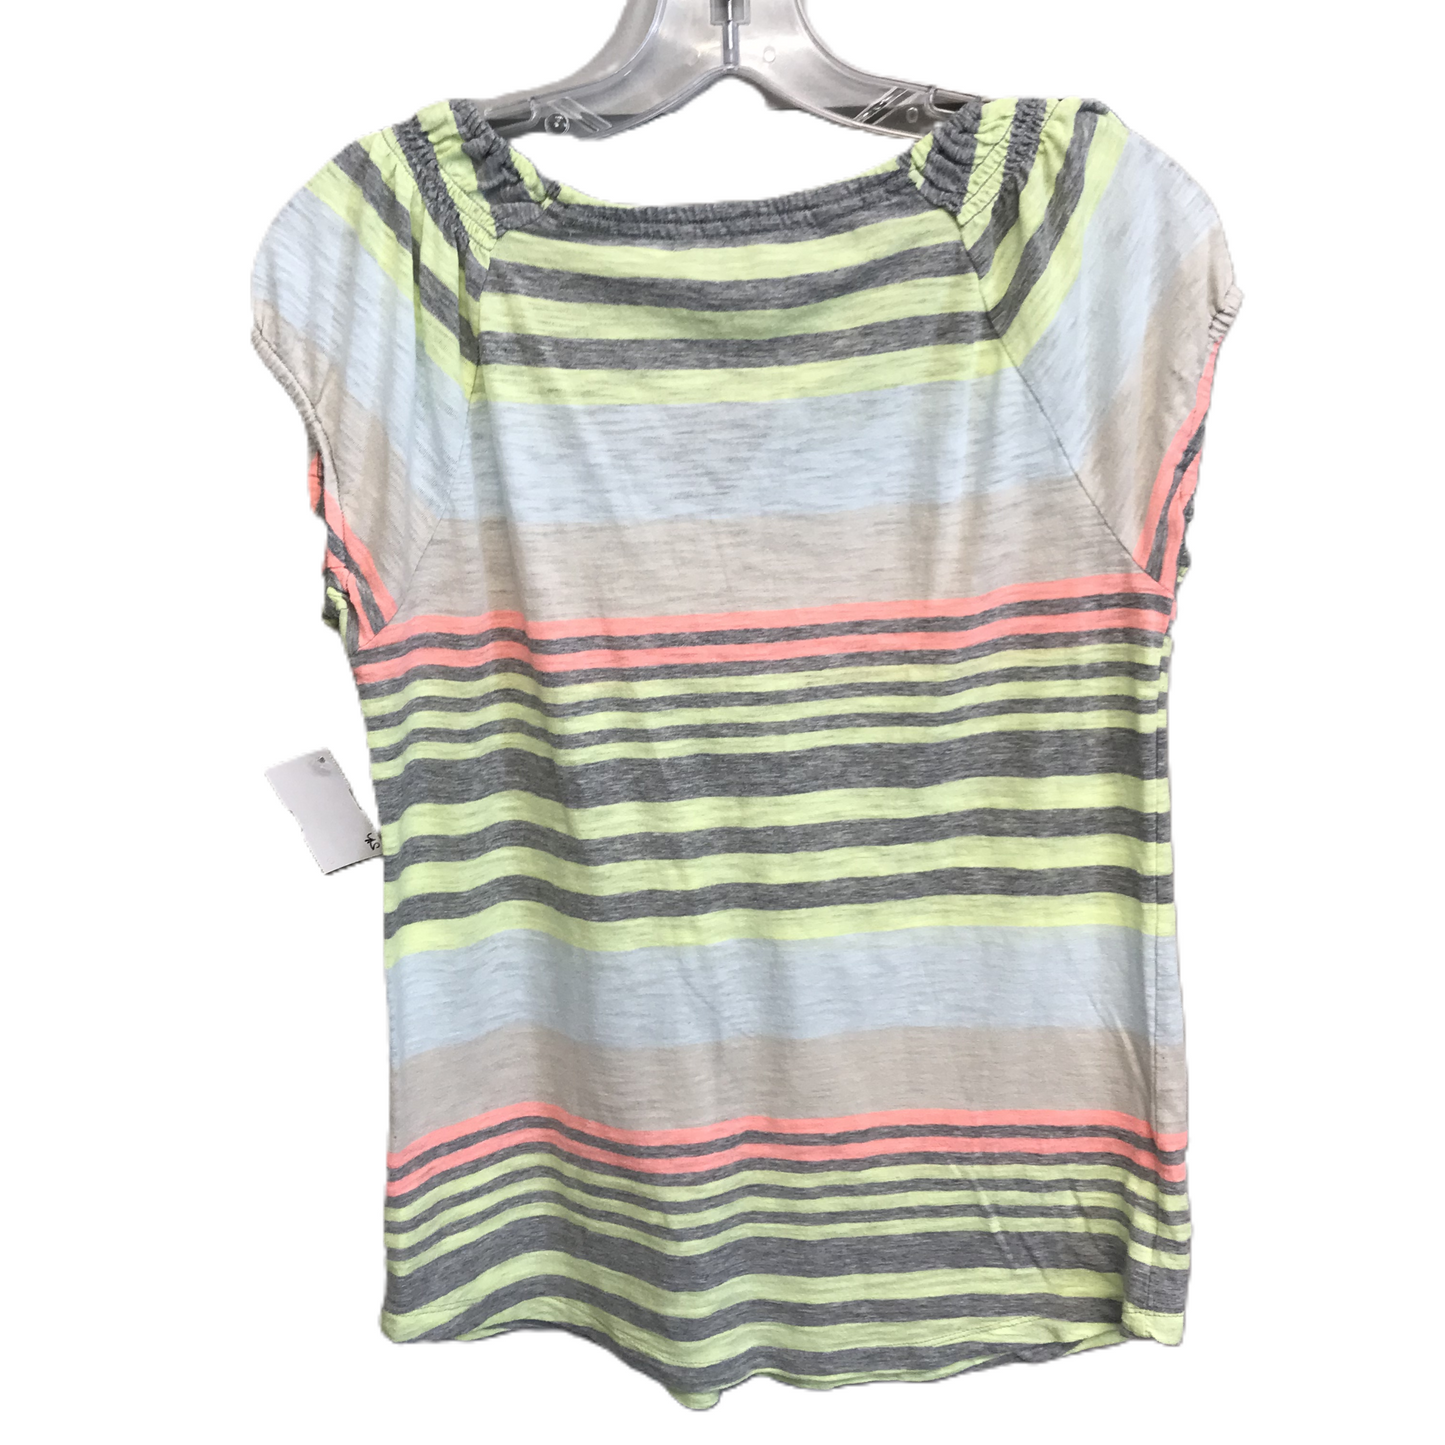 Striped Pattern Top Short Sleeve By Gap, Size: S